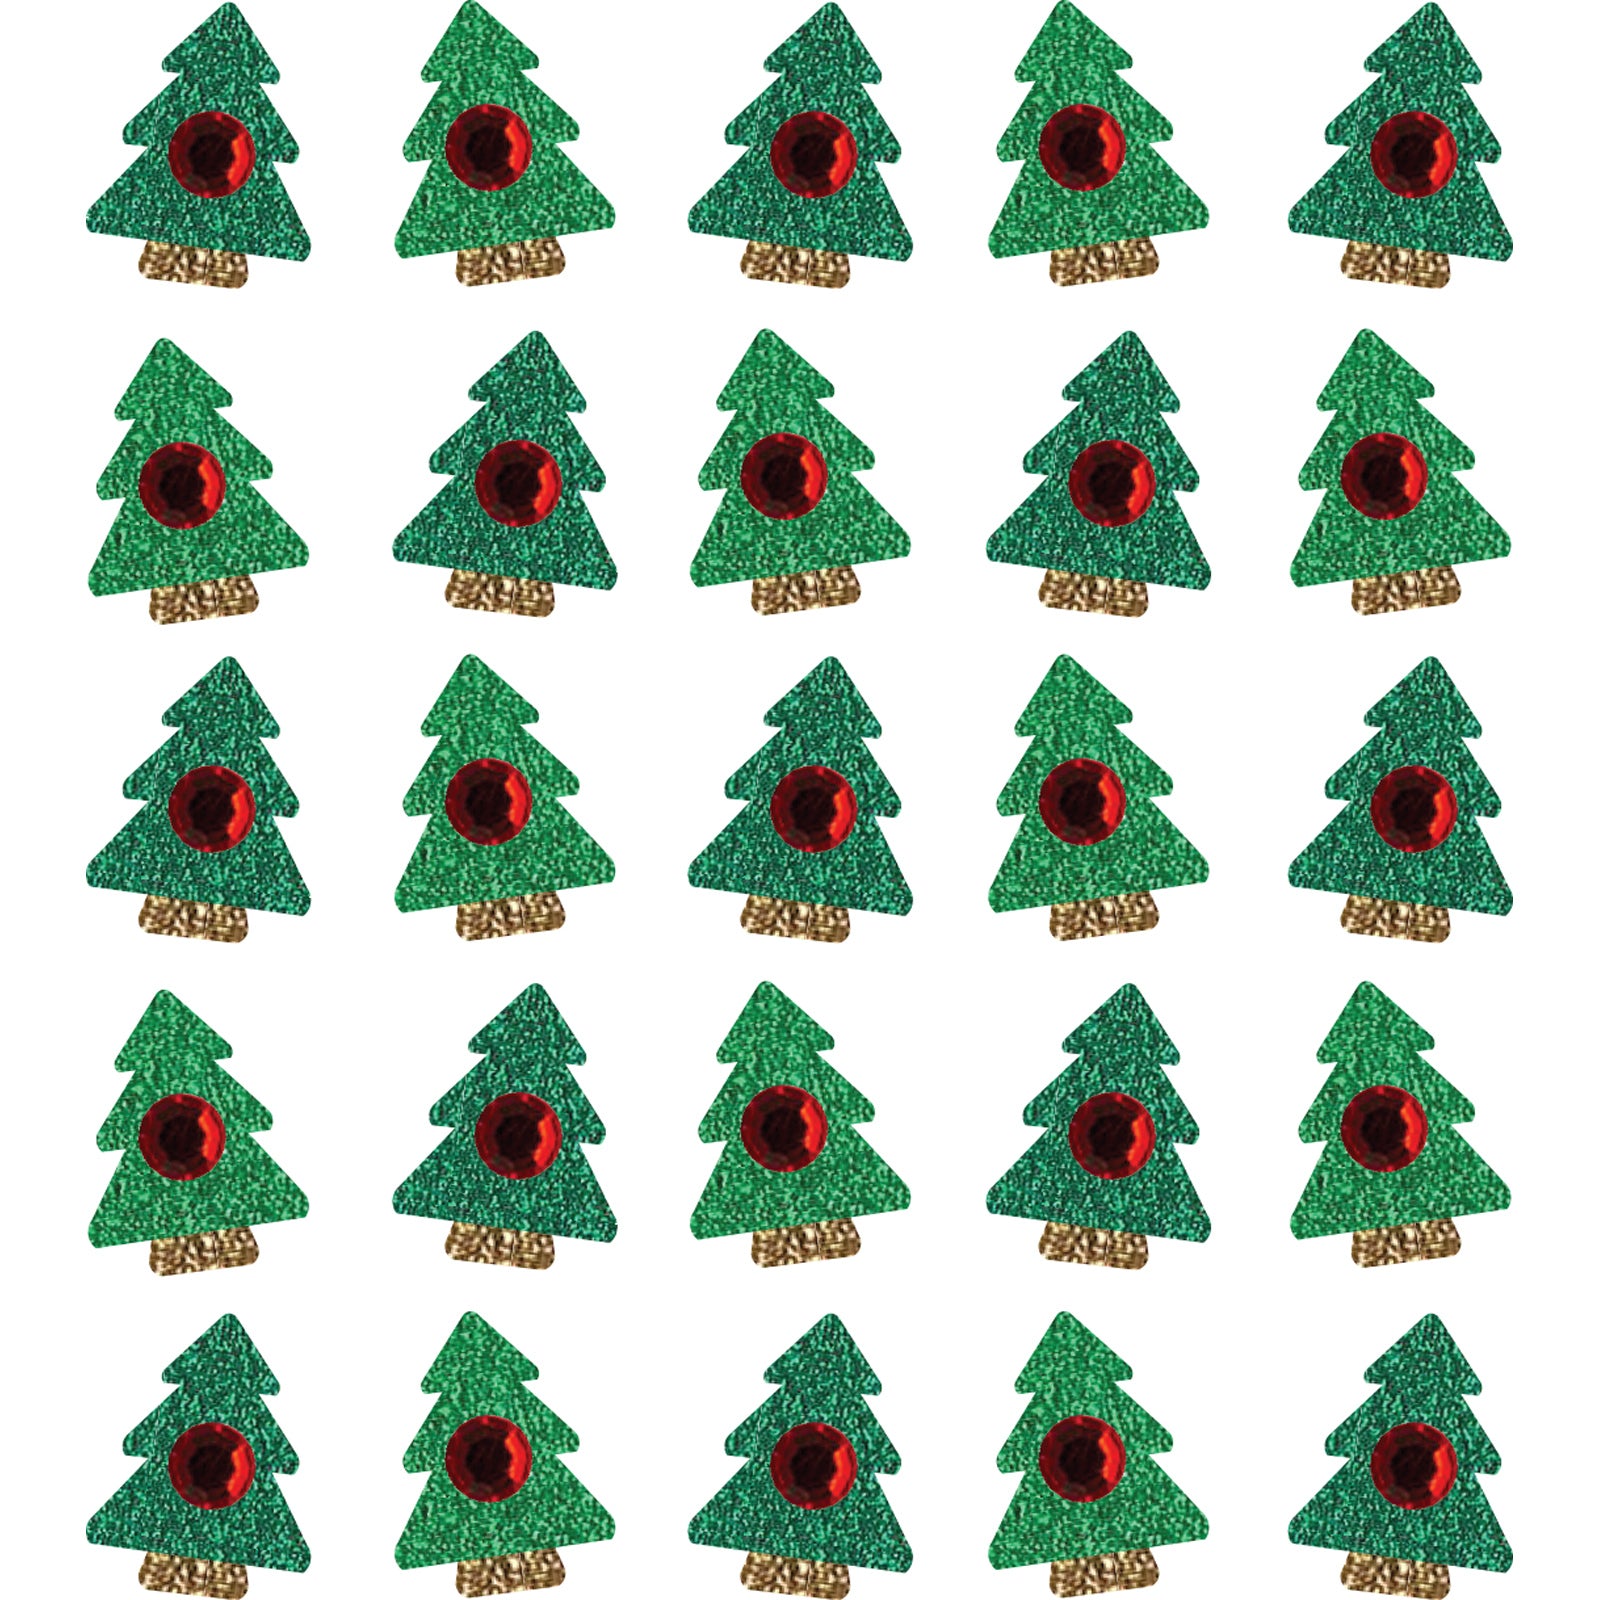 Jolee's Boutique Stickers Repeats Christmas Tree